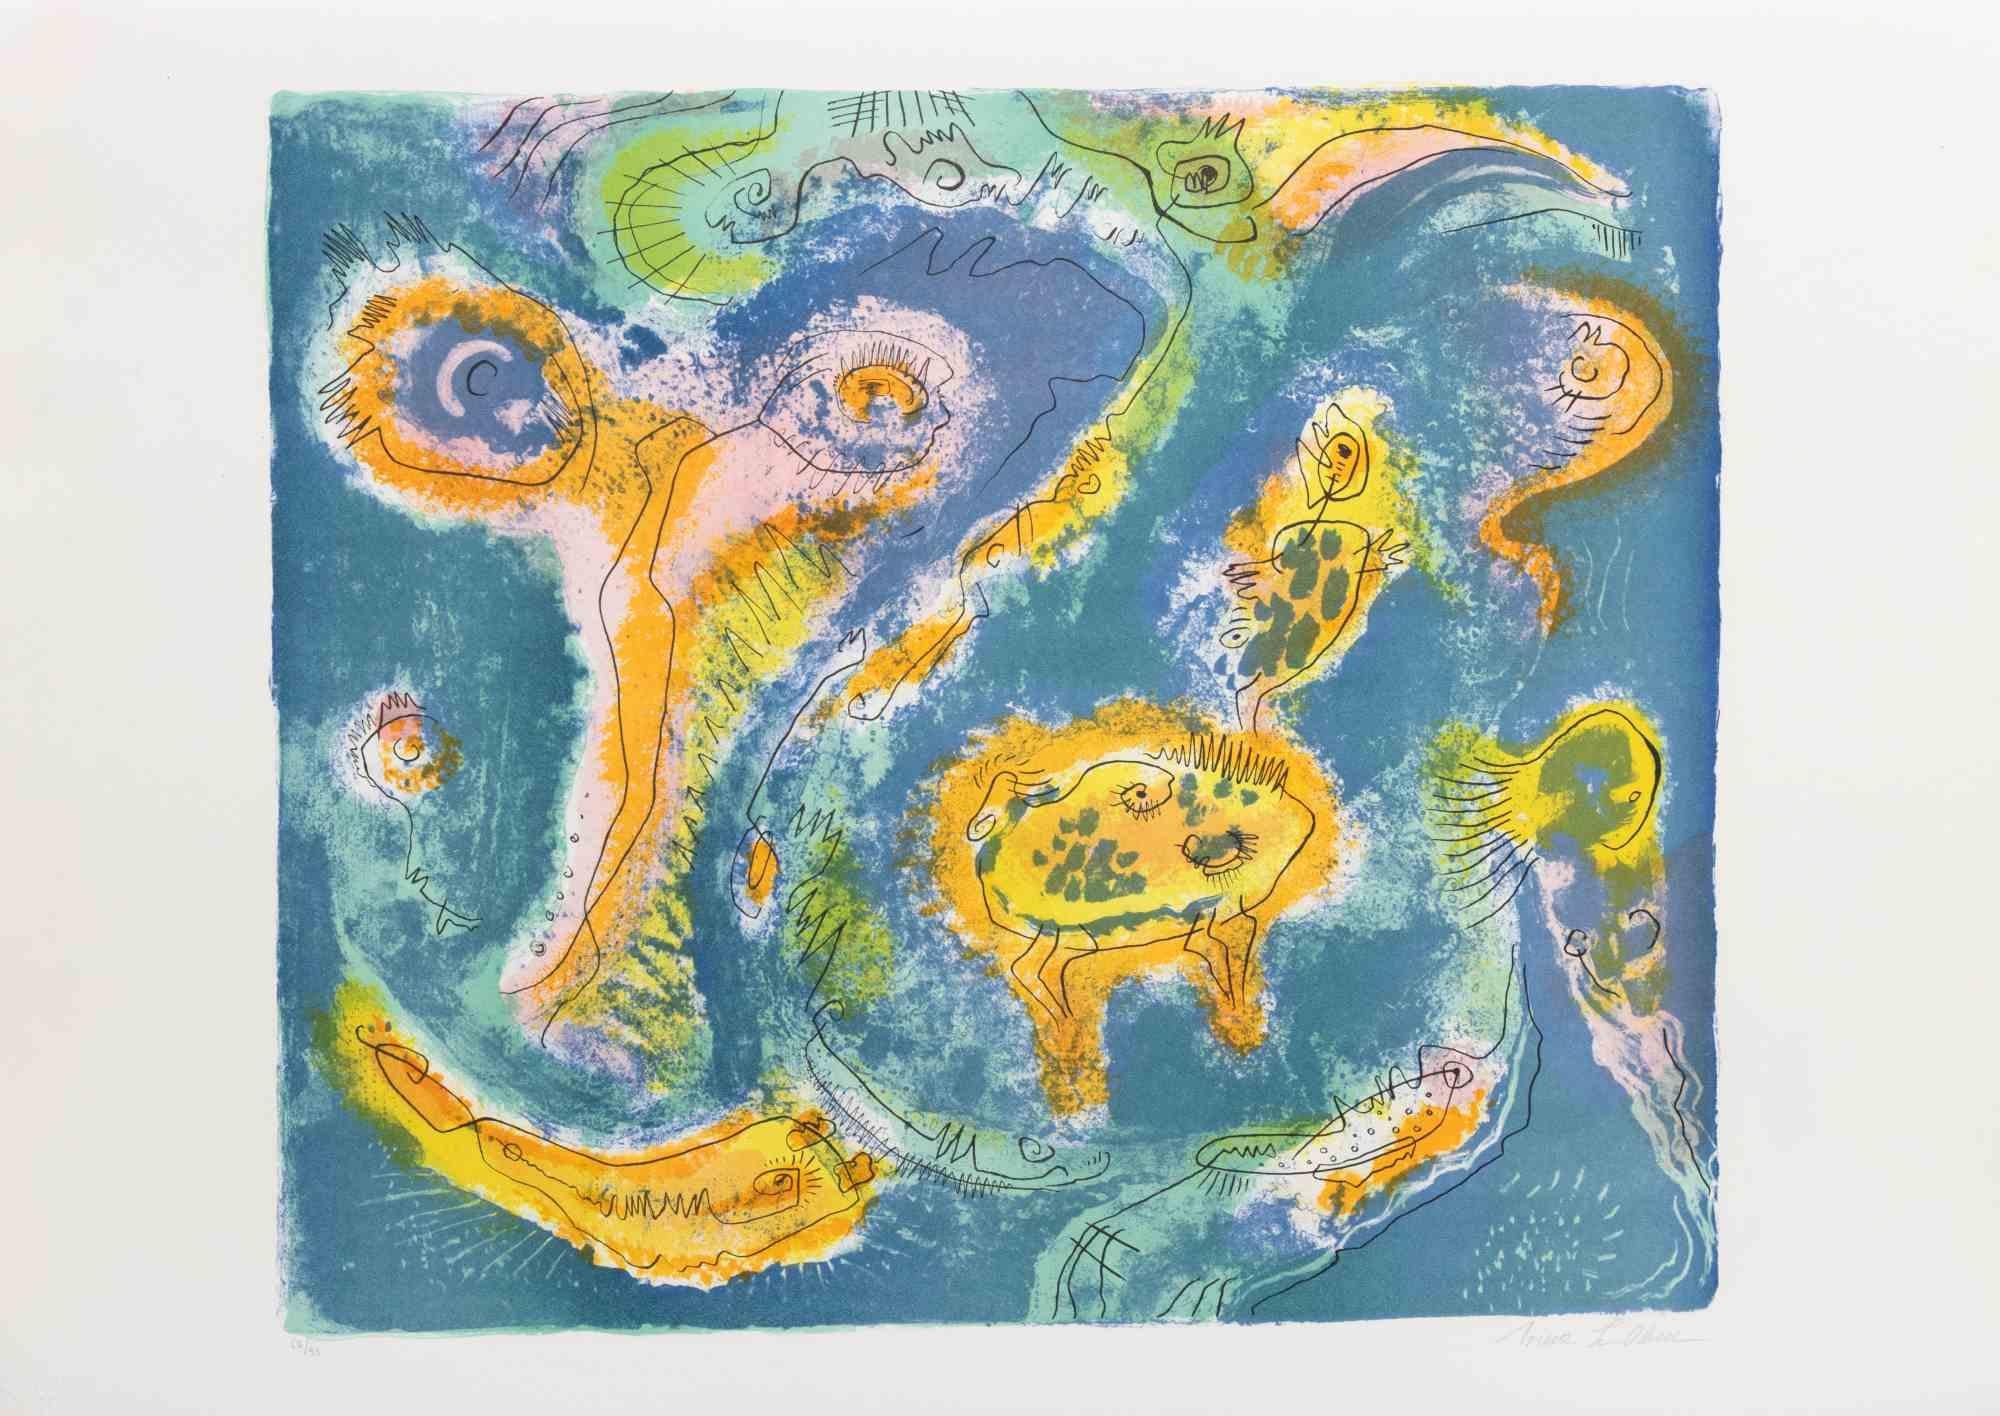 The Pond is an contemporary artwork realized by Le Pond in 1970s.

Mixed colored lithograph.

Hand signed on the lower margin.

Numbered on the lower margin.

Edition of 67/95.